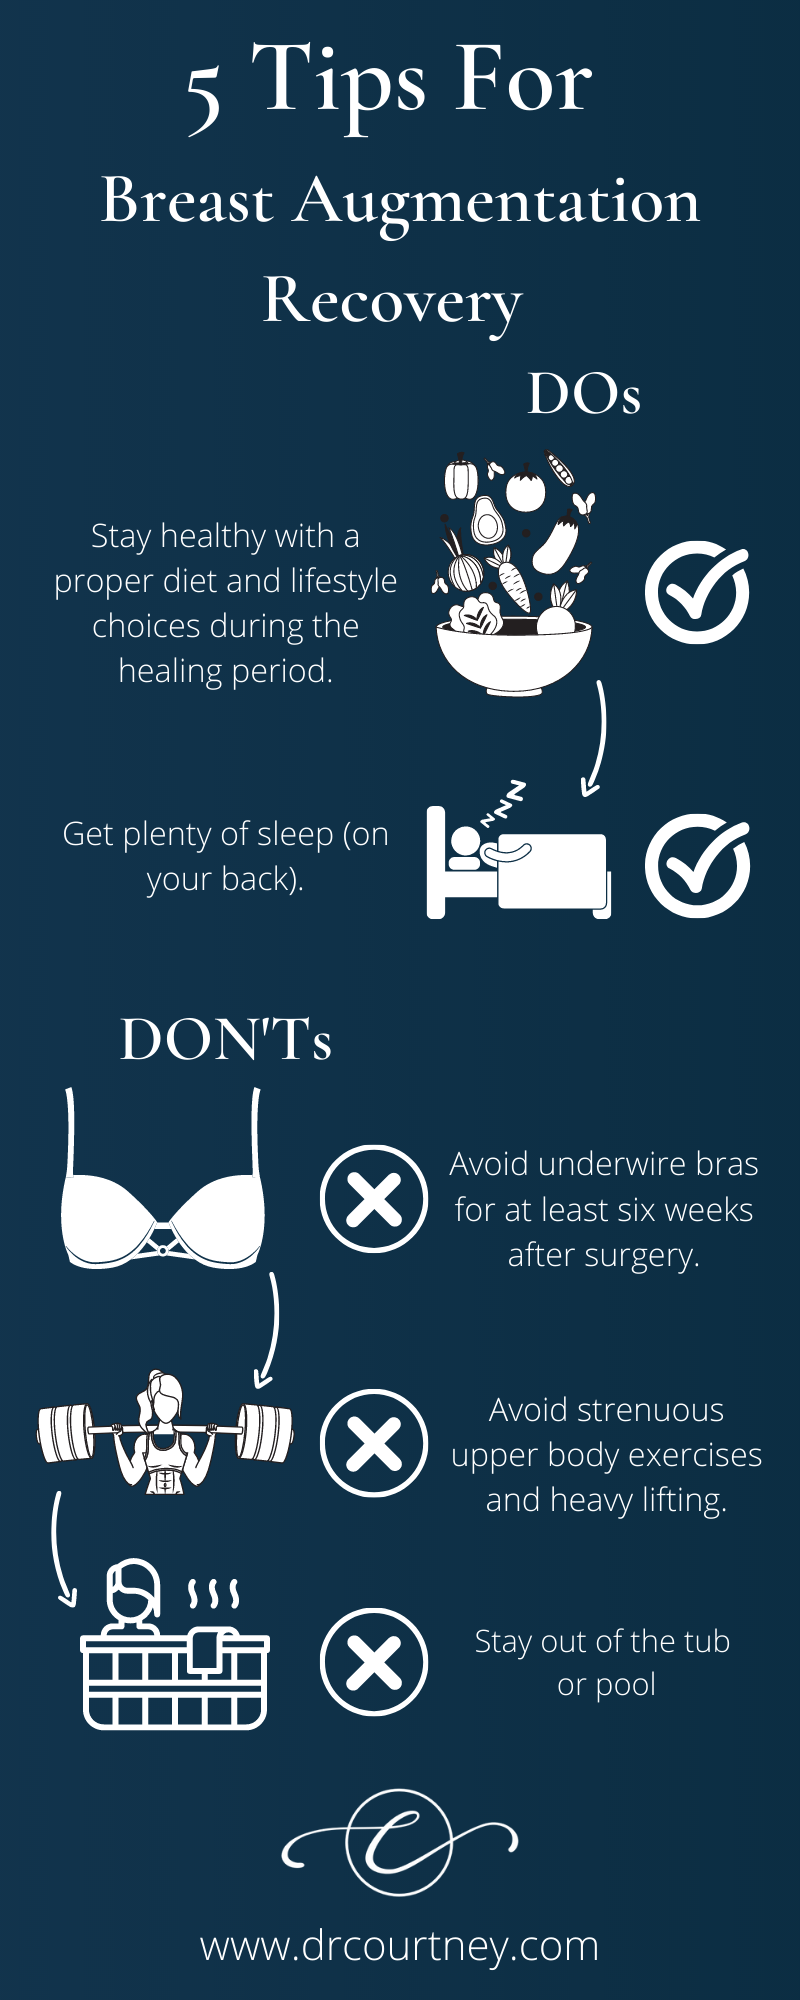 5 Tips for Breast Augmentation Recovery infrographic